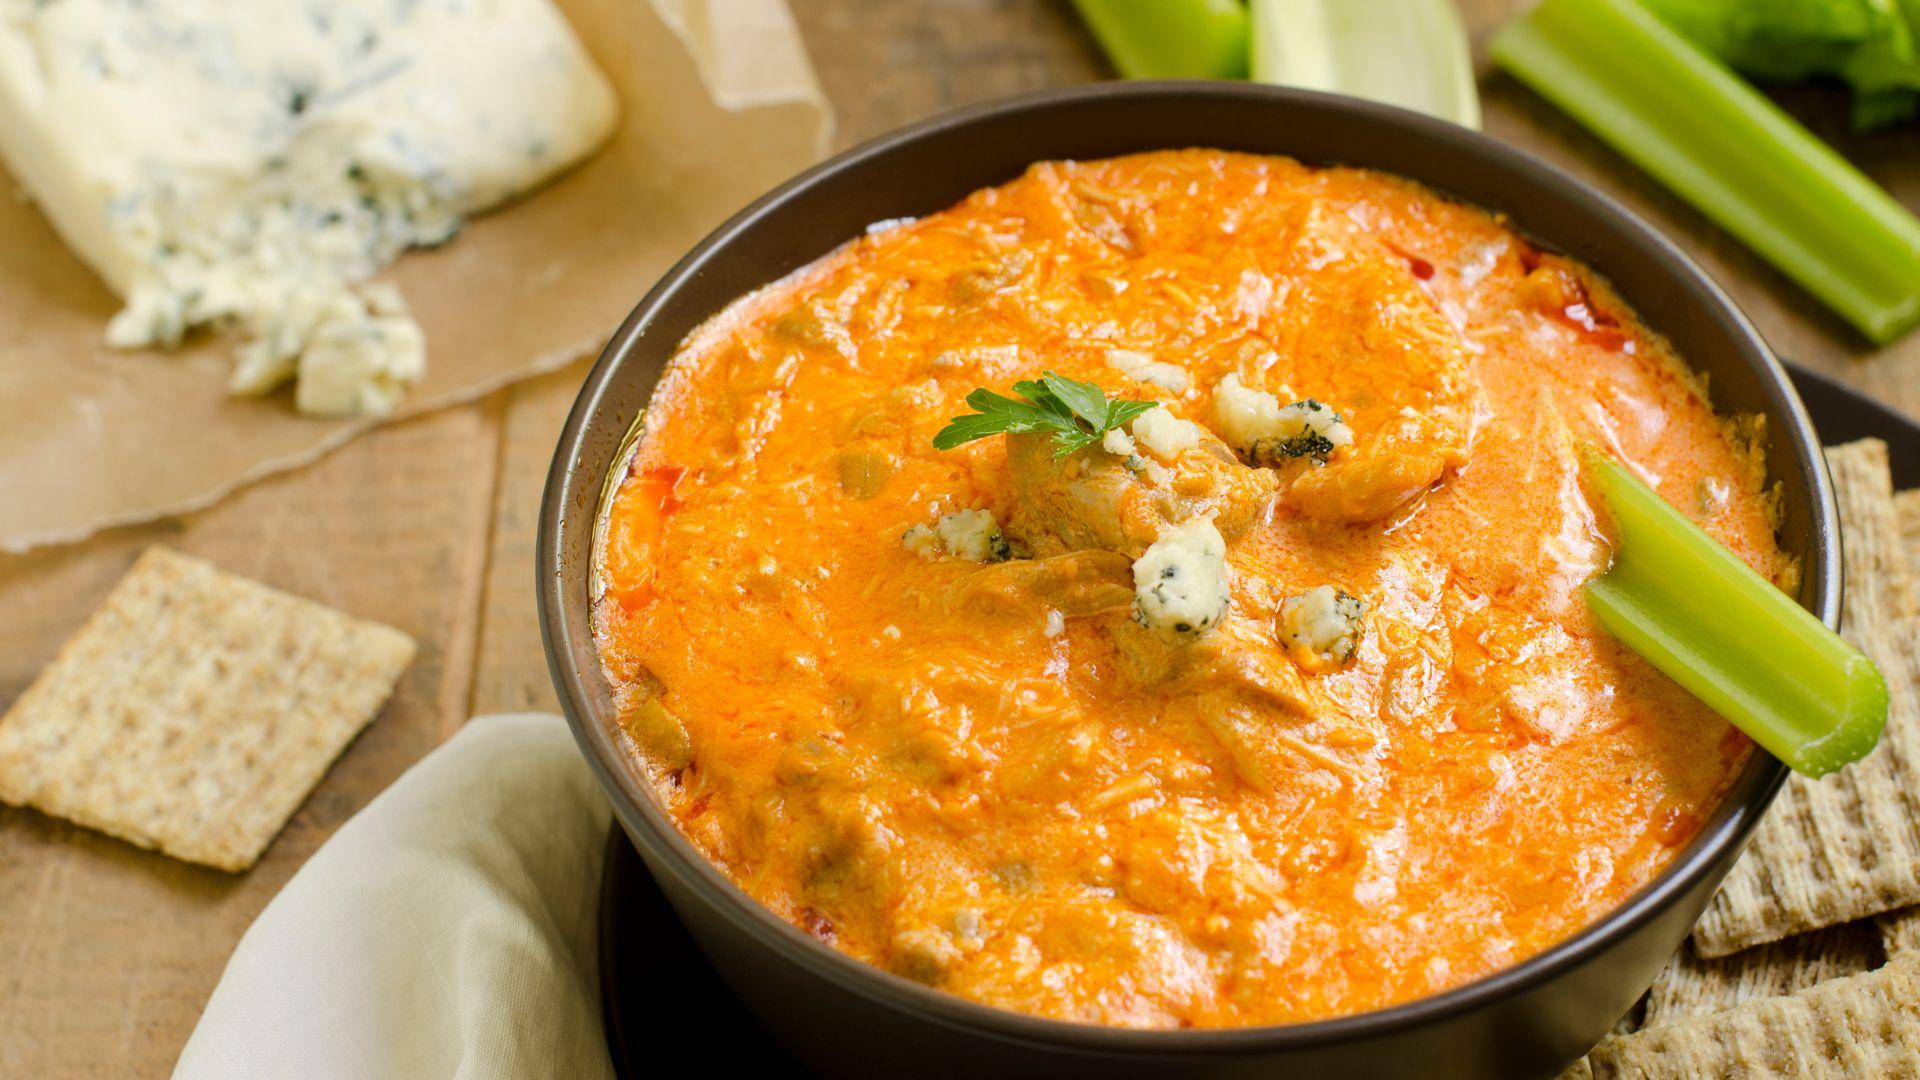 Cannabis-Infused Buffalo Chicken Dip